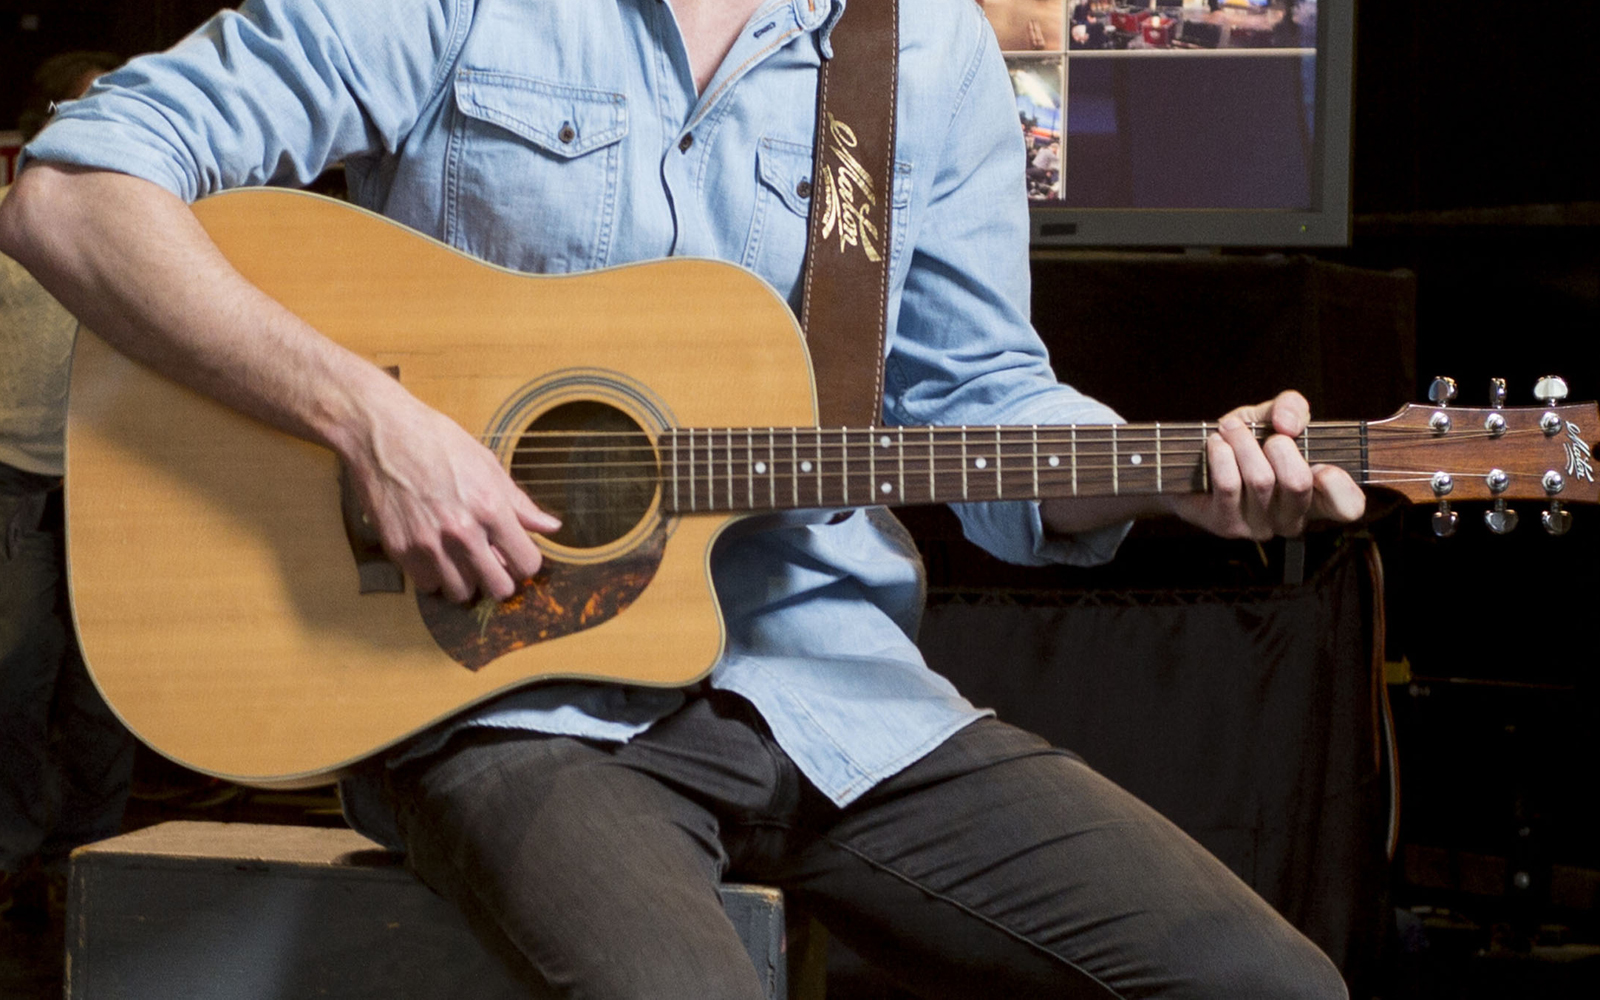 In this April 14, 2015 photo, Australian singer-songwriter Vance Joy poses for a portrait in New York. Joy released his debut album, “Dream Your Life Away,” last year, and he recorded some vocals and drum tracks in a tree house at the studio of Ryan Hadlock, best known for his work with the Lumineers. (Photo by Drew Gurian/Invision/AP)